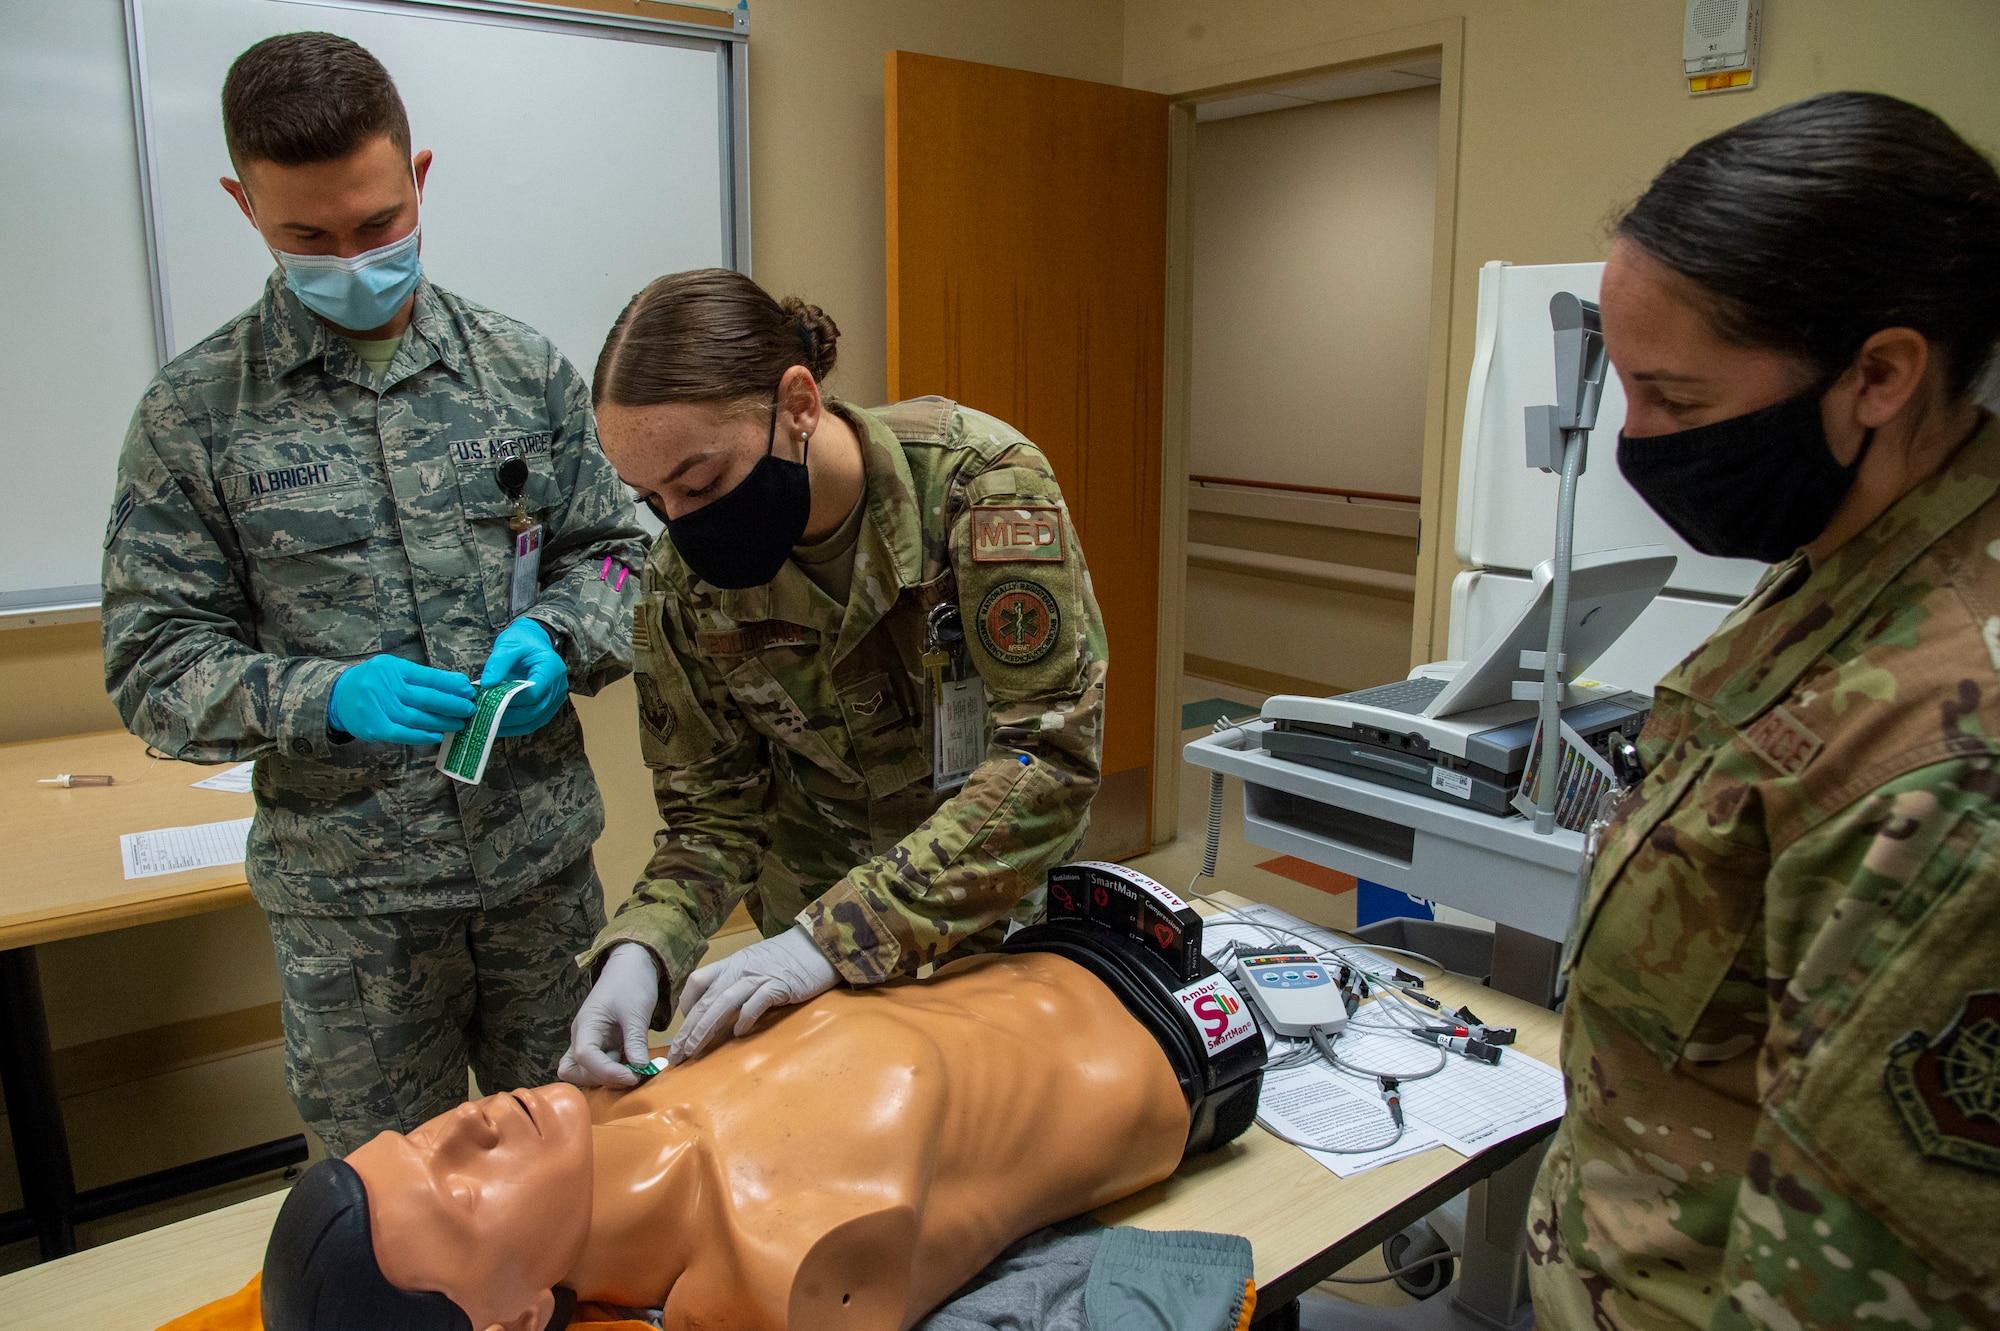 Members of the 6th Medical Group participate in a nursing skill fair at MacDill Air Force Base, Fla., Dec. 7, 2020.